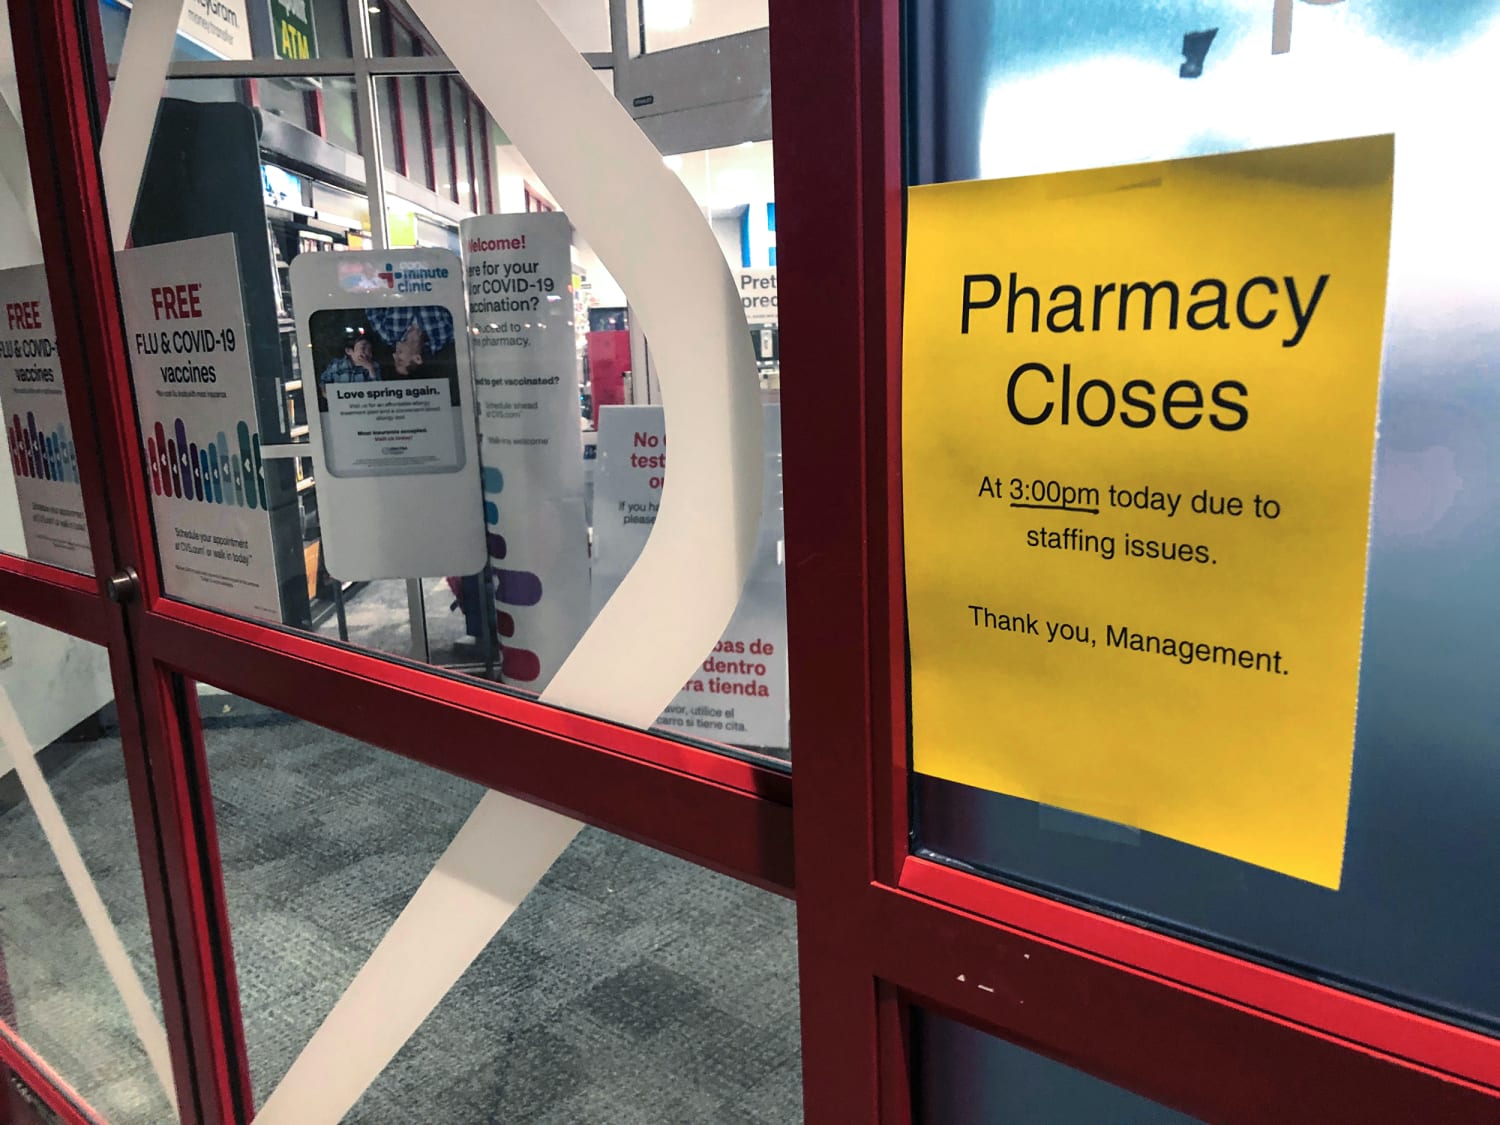 Why Are CVS and Walgreens Always Together? (Solved)